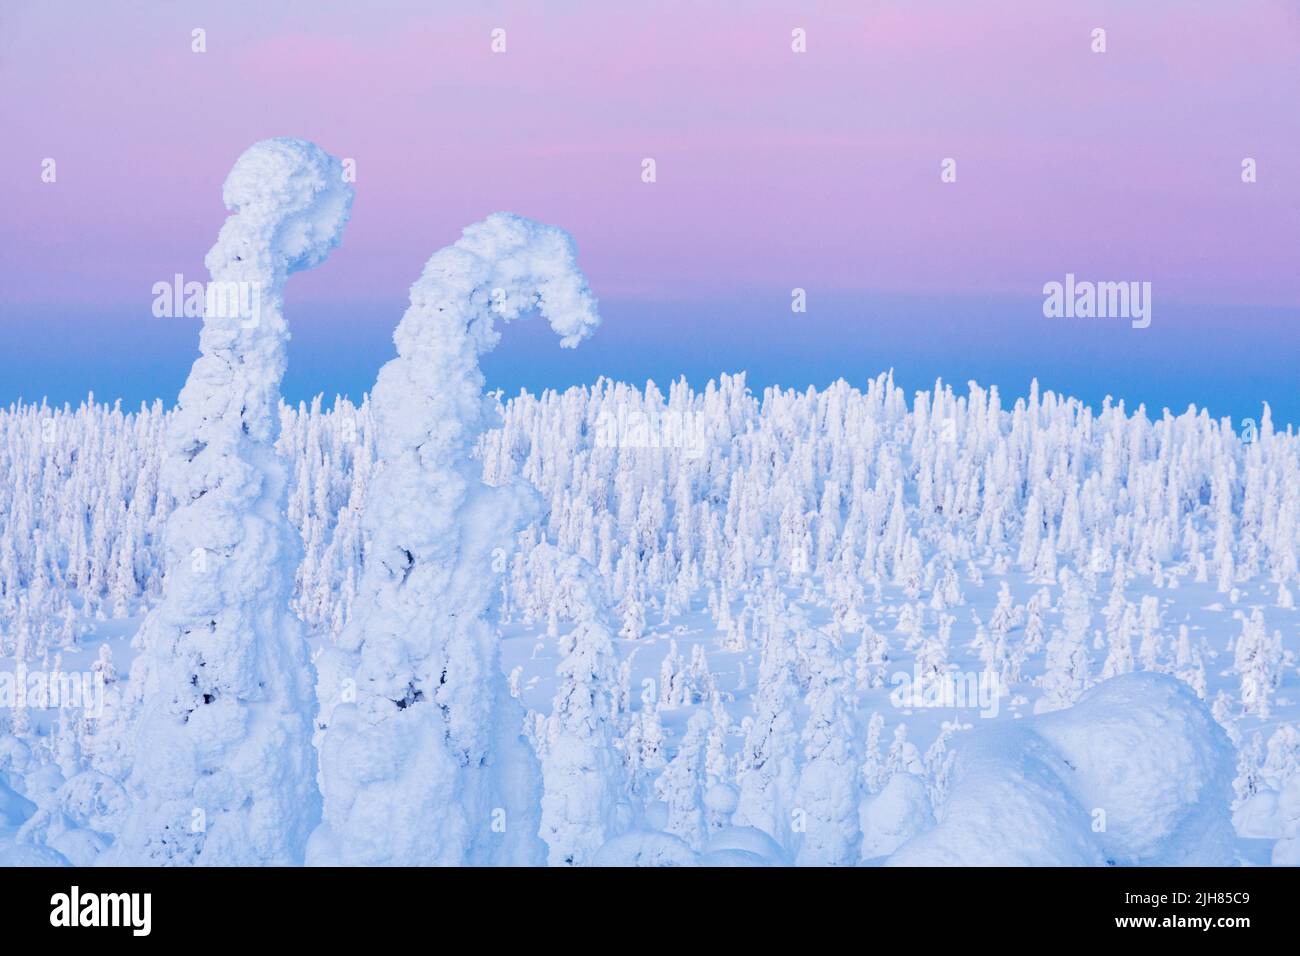 Snow-covered Spruce trees on a hillside and pinkish sky behind them in Riisitunturi National Park during an evening Stock Photo